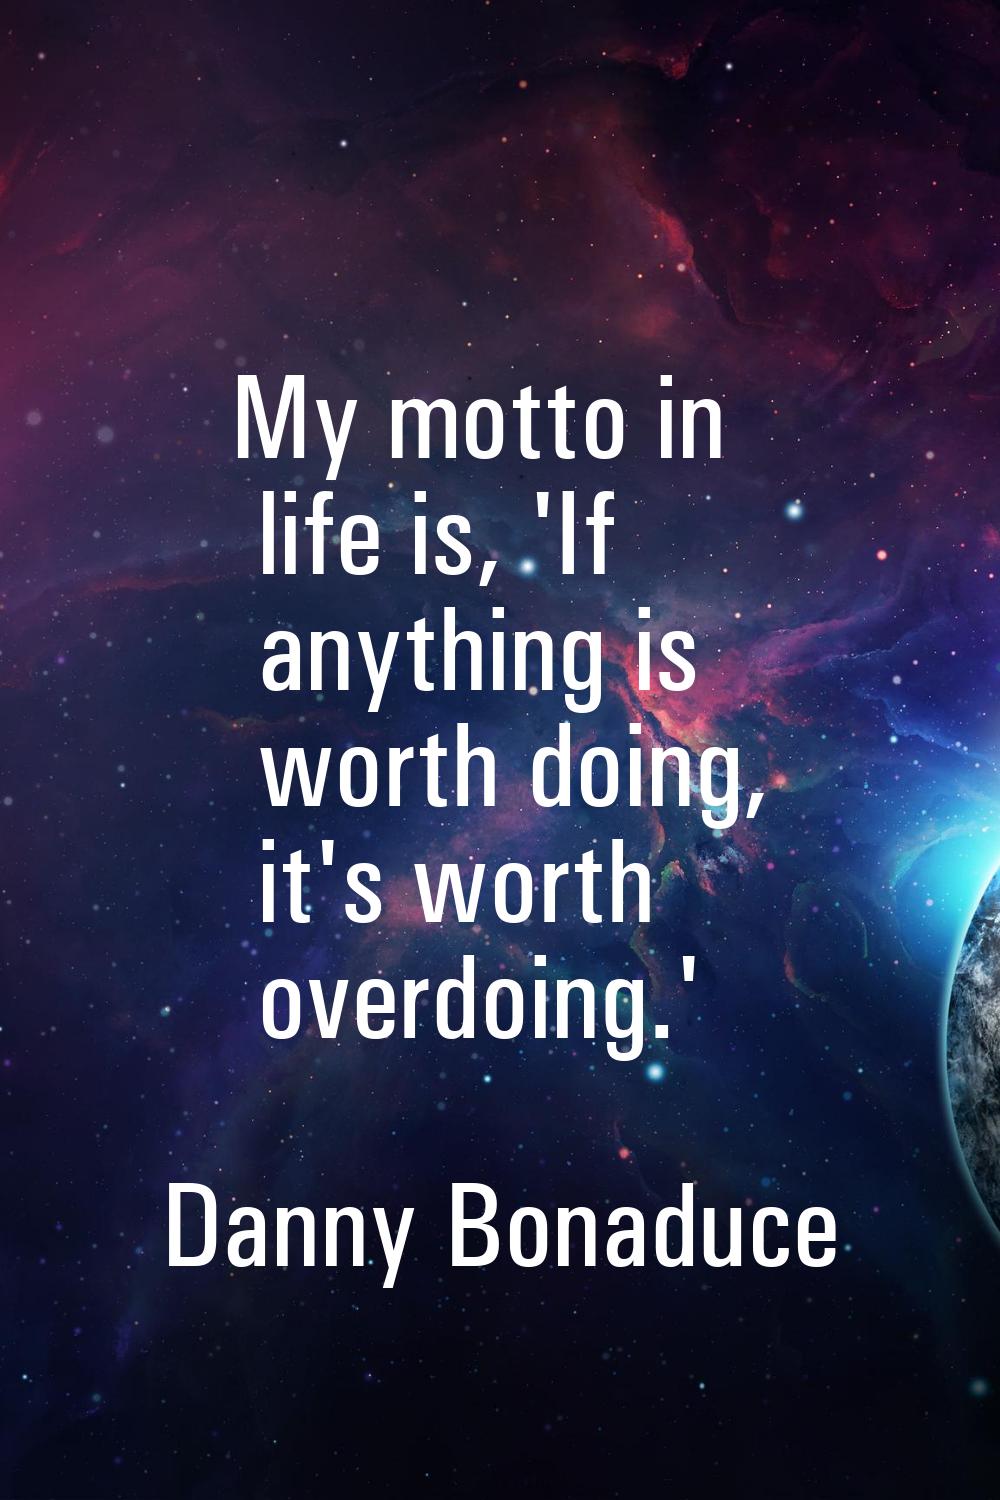 My motto in life is, 'If anything is worth doing, it's worth overdoing.'